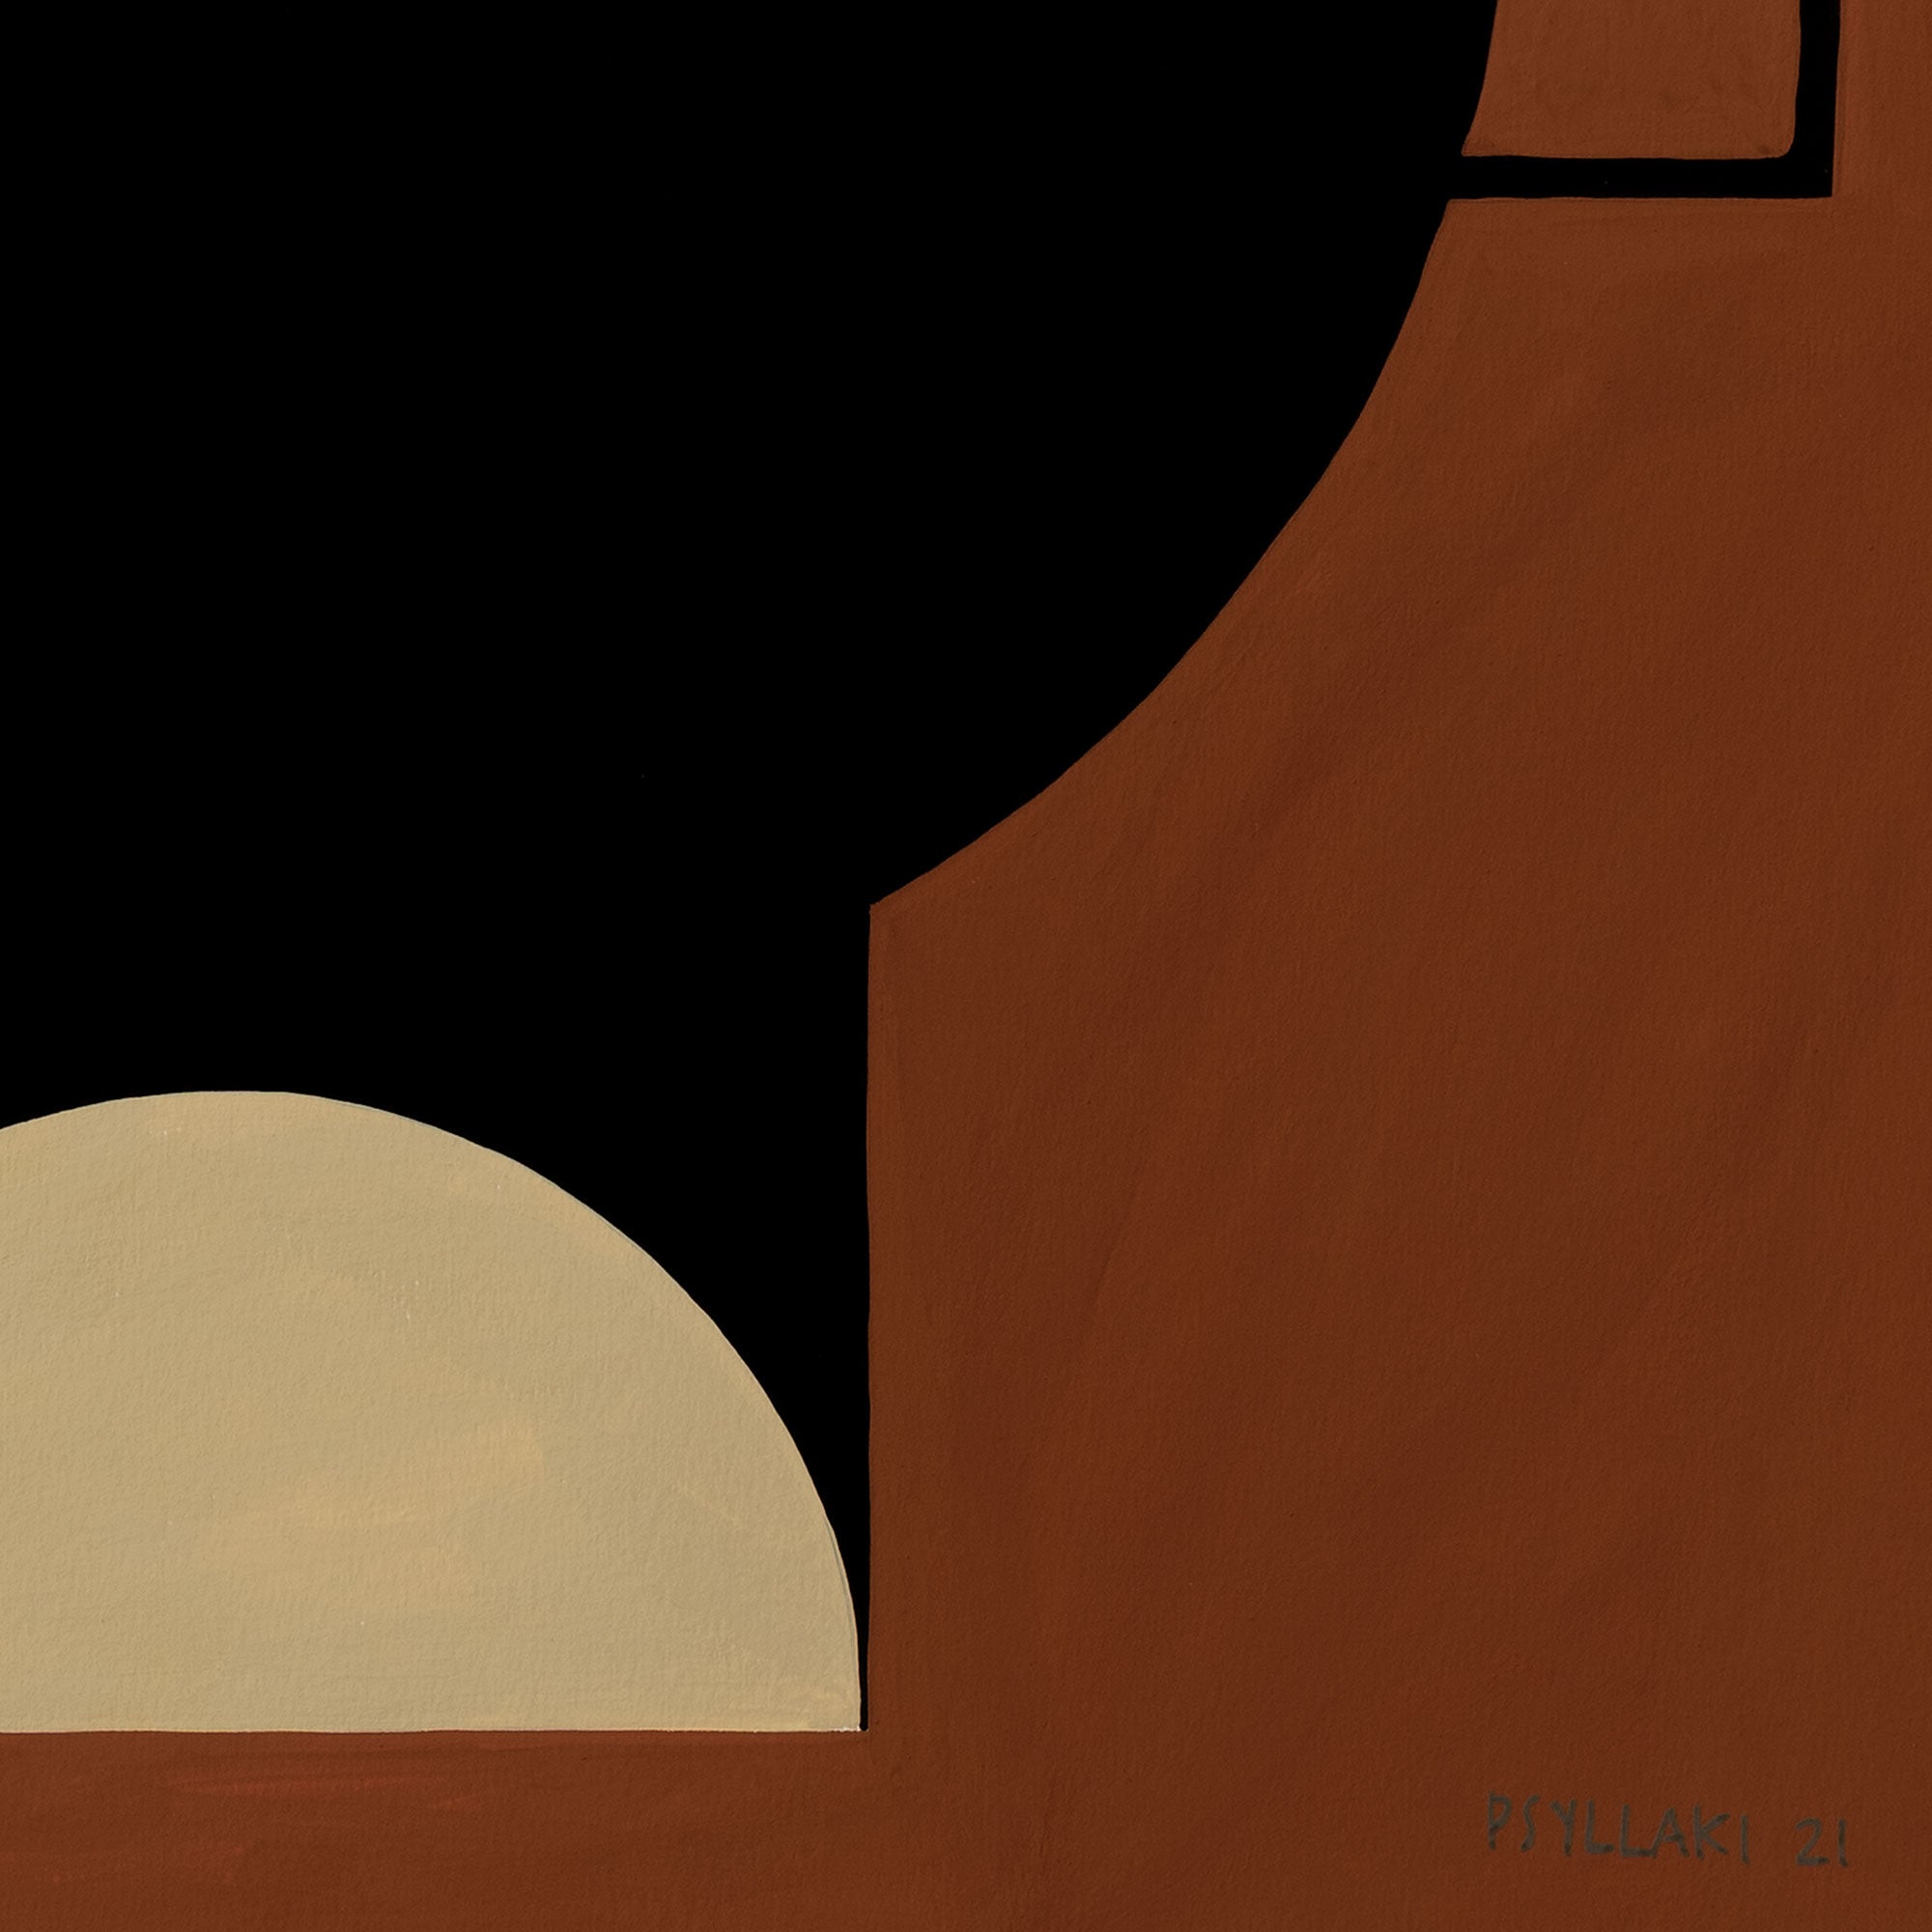 SILHOUETTE OF A VASE 23